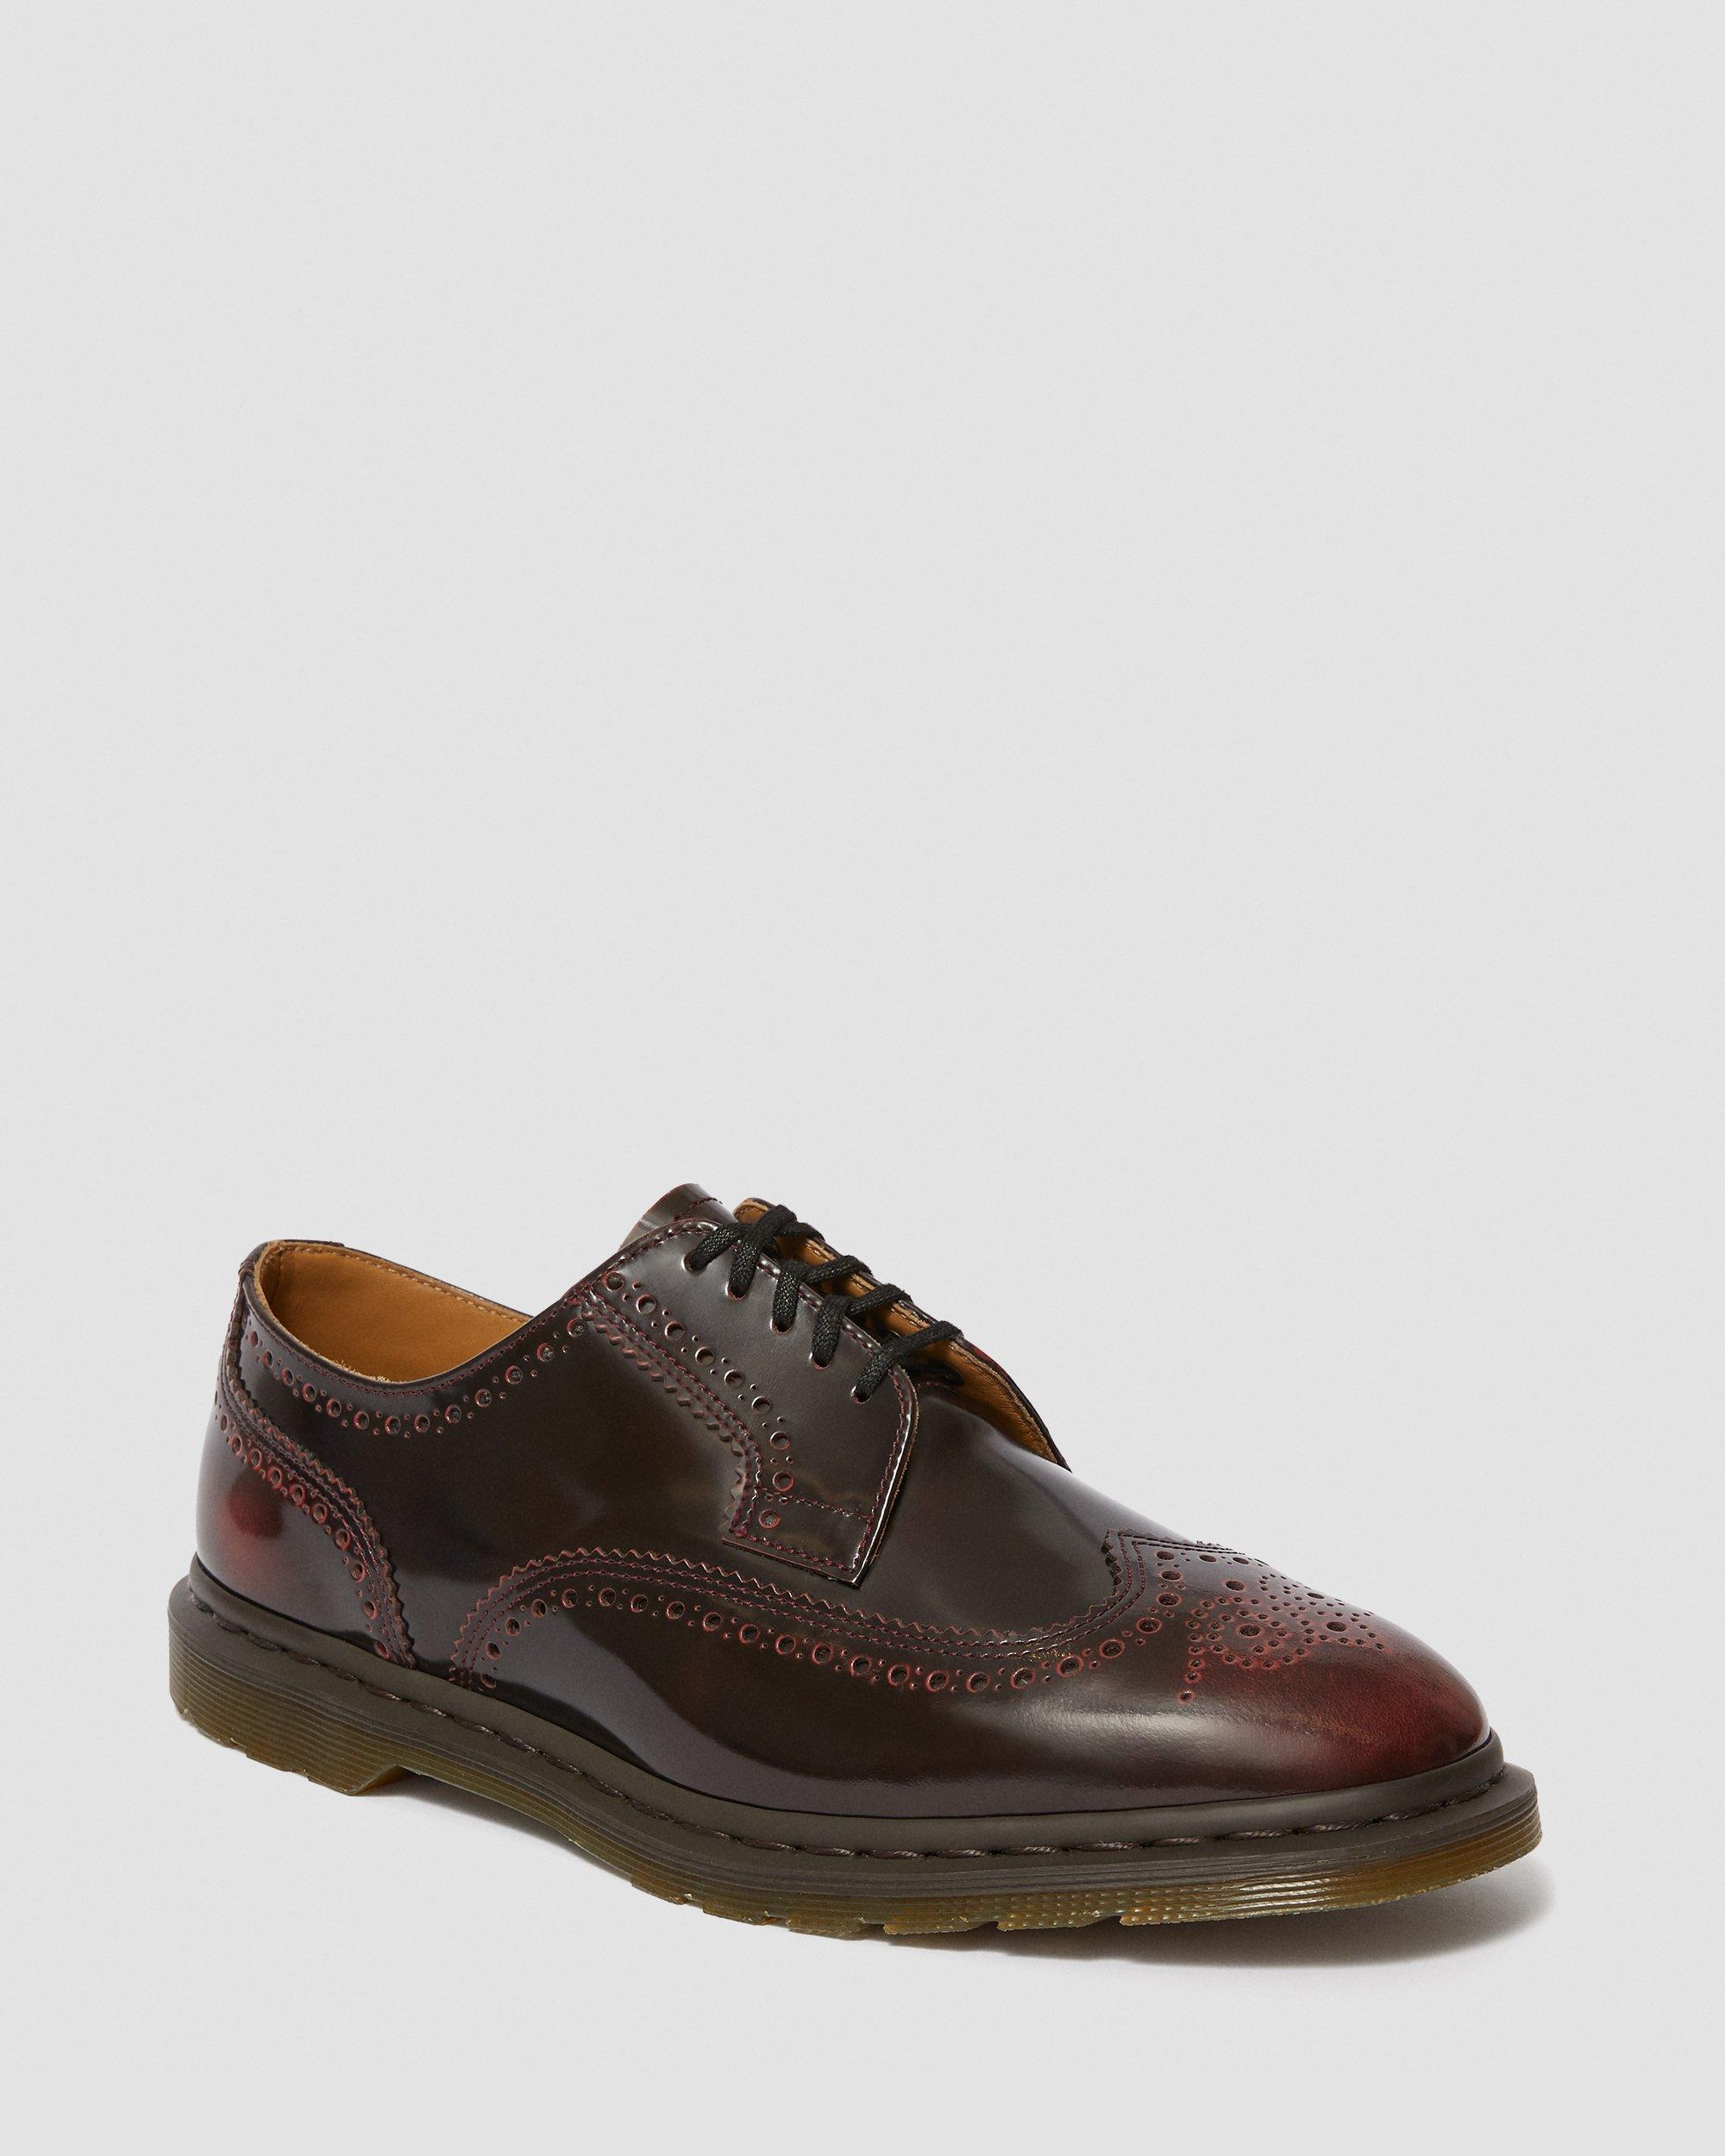 Kelvin II Arcadia Leather Brogue Shoes in Cherry Red | Dr. Martens